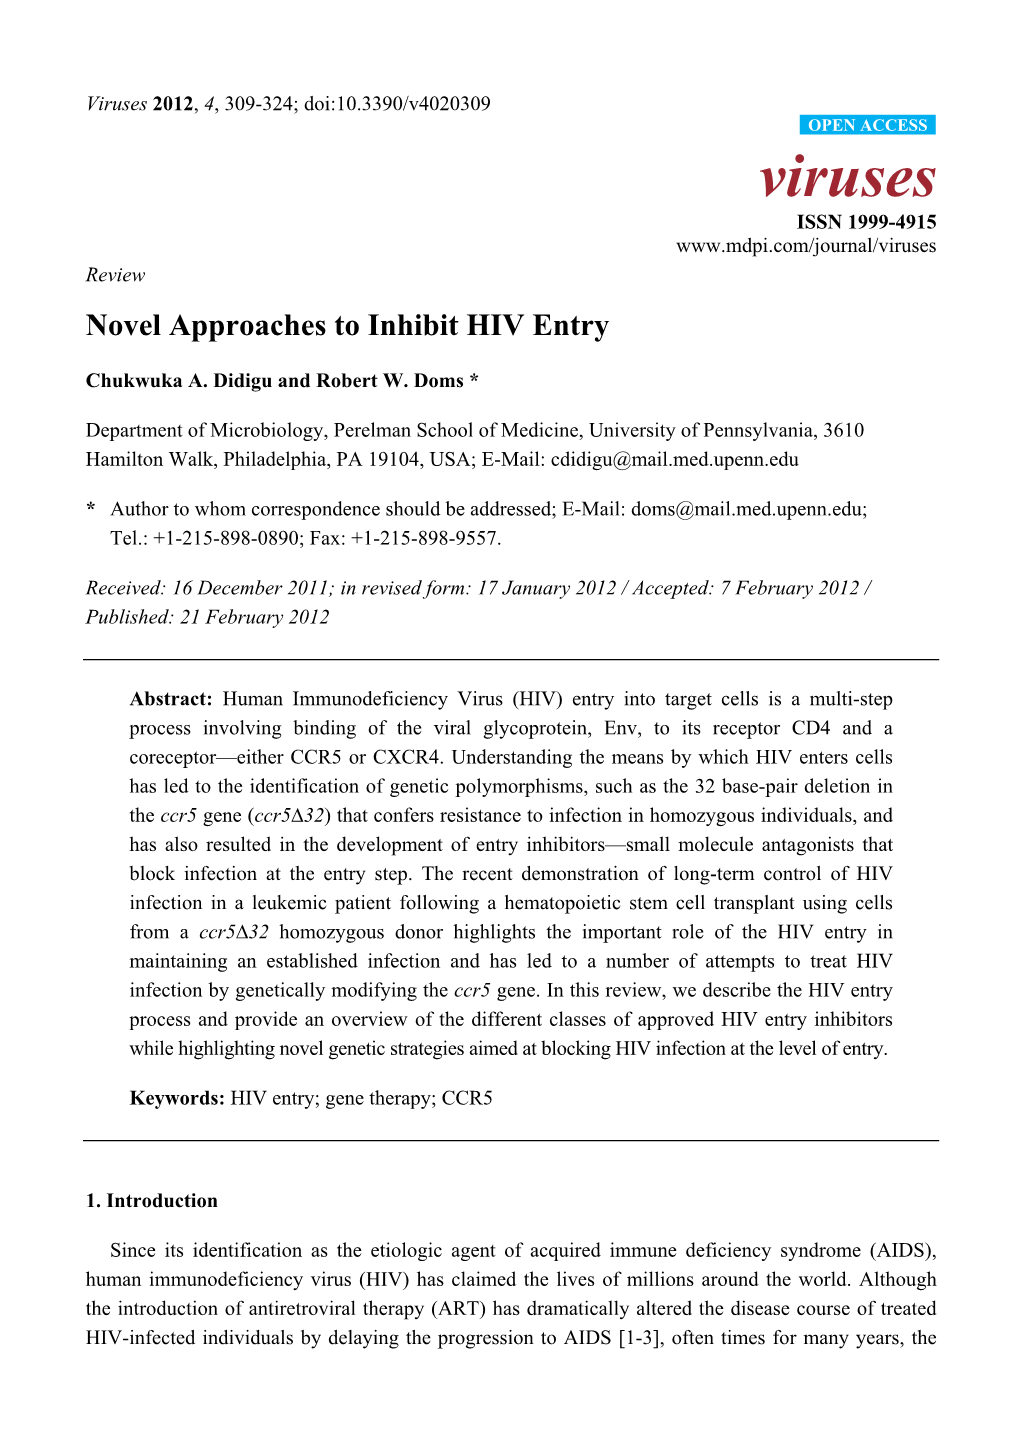 Novel Approaches to Inhibit HIV Entry